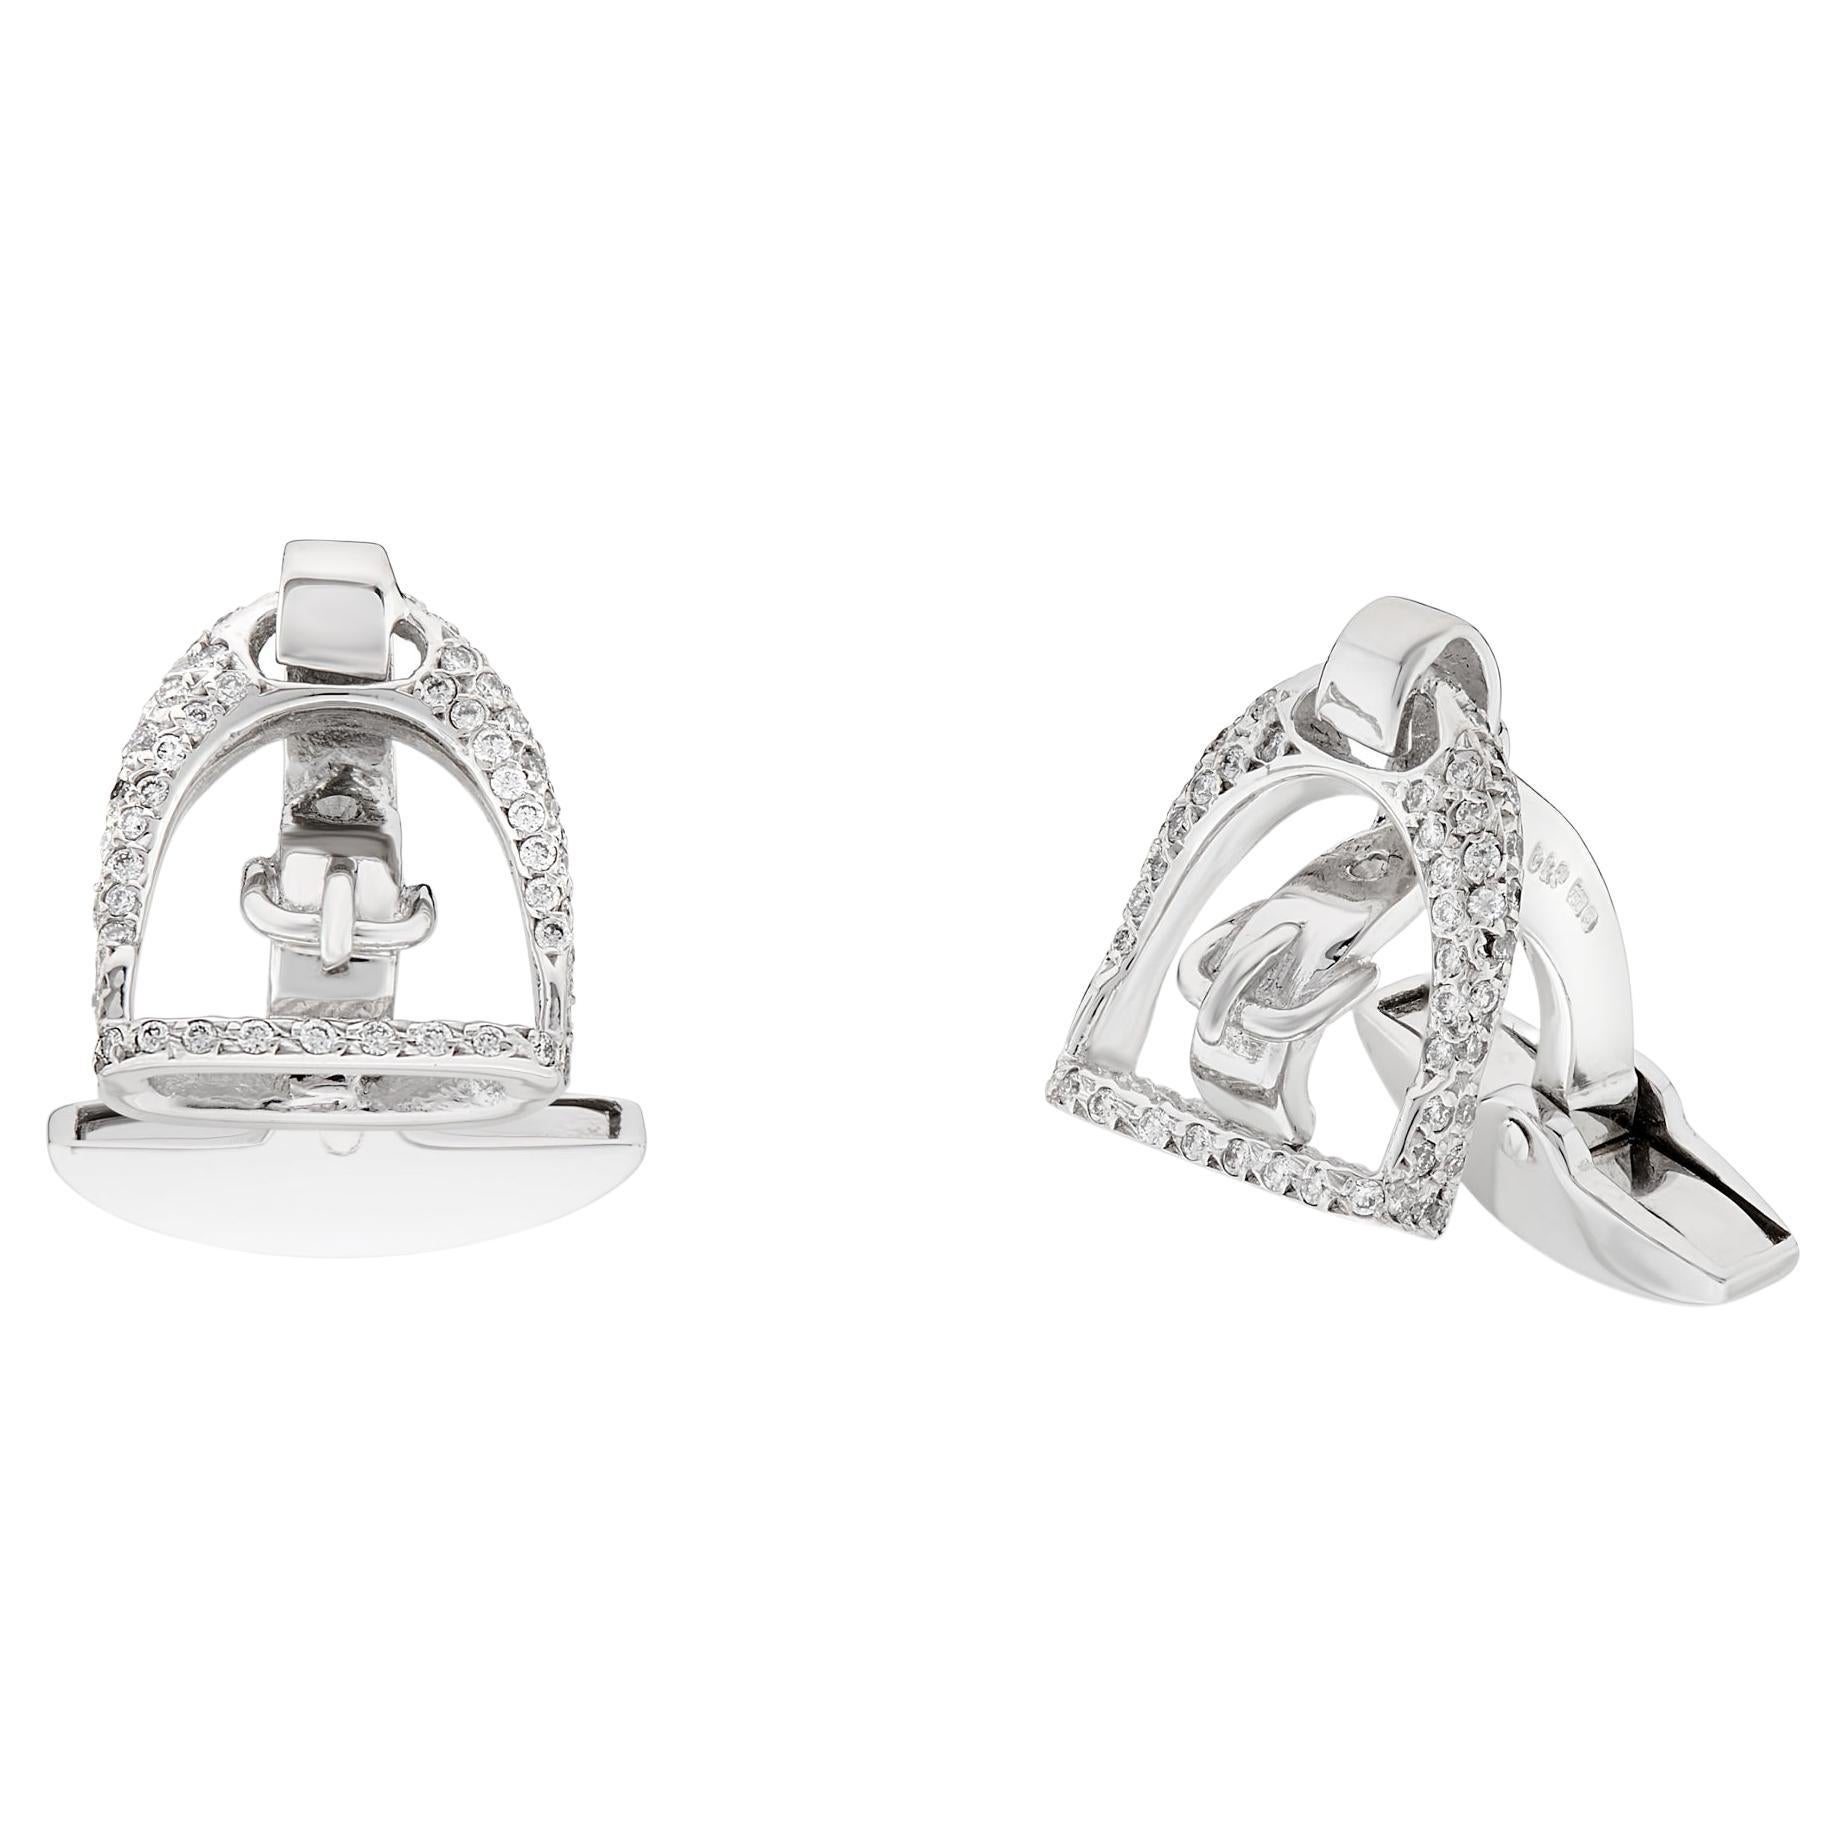 Deakin & Francis 18ct White Gold Stirrup Cufflinks with Pavé Diamond Border For Sale